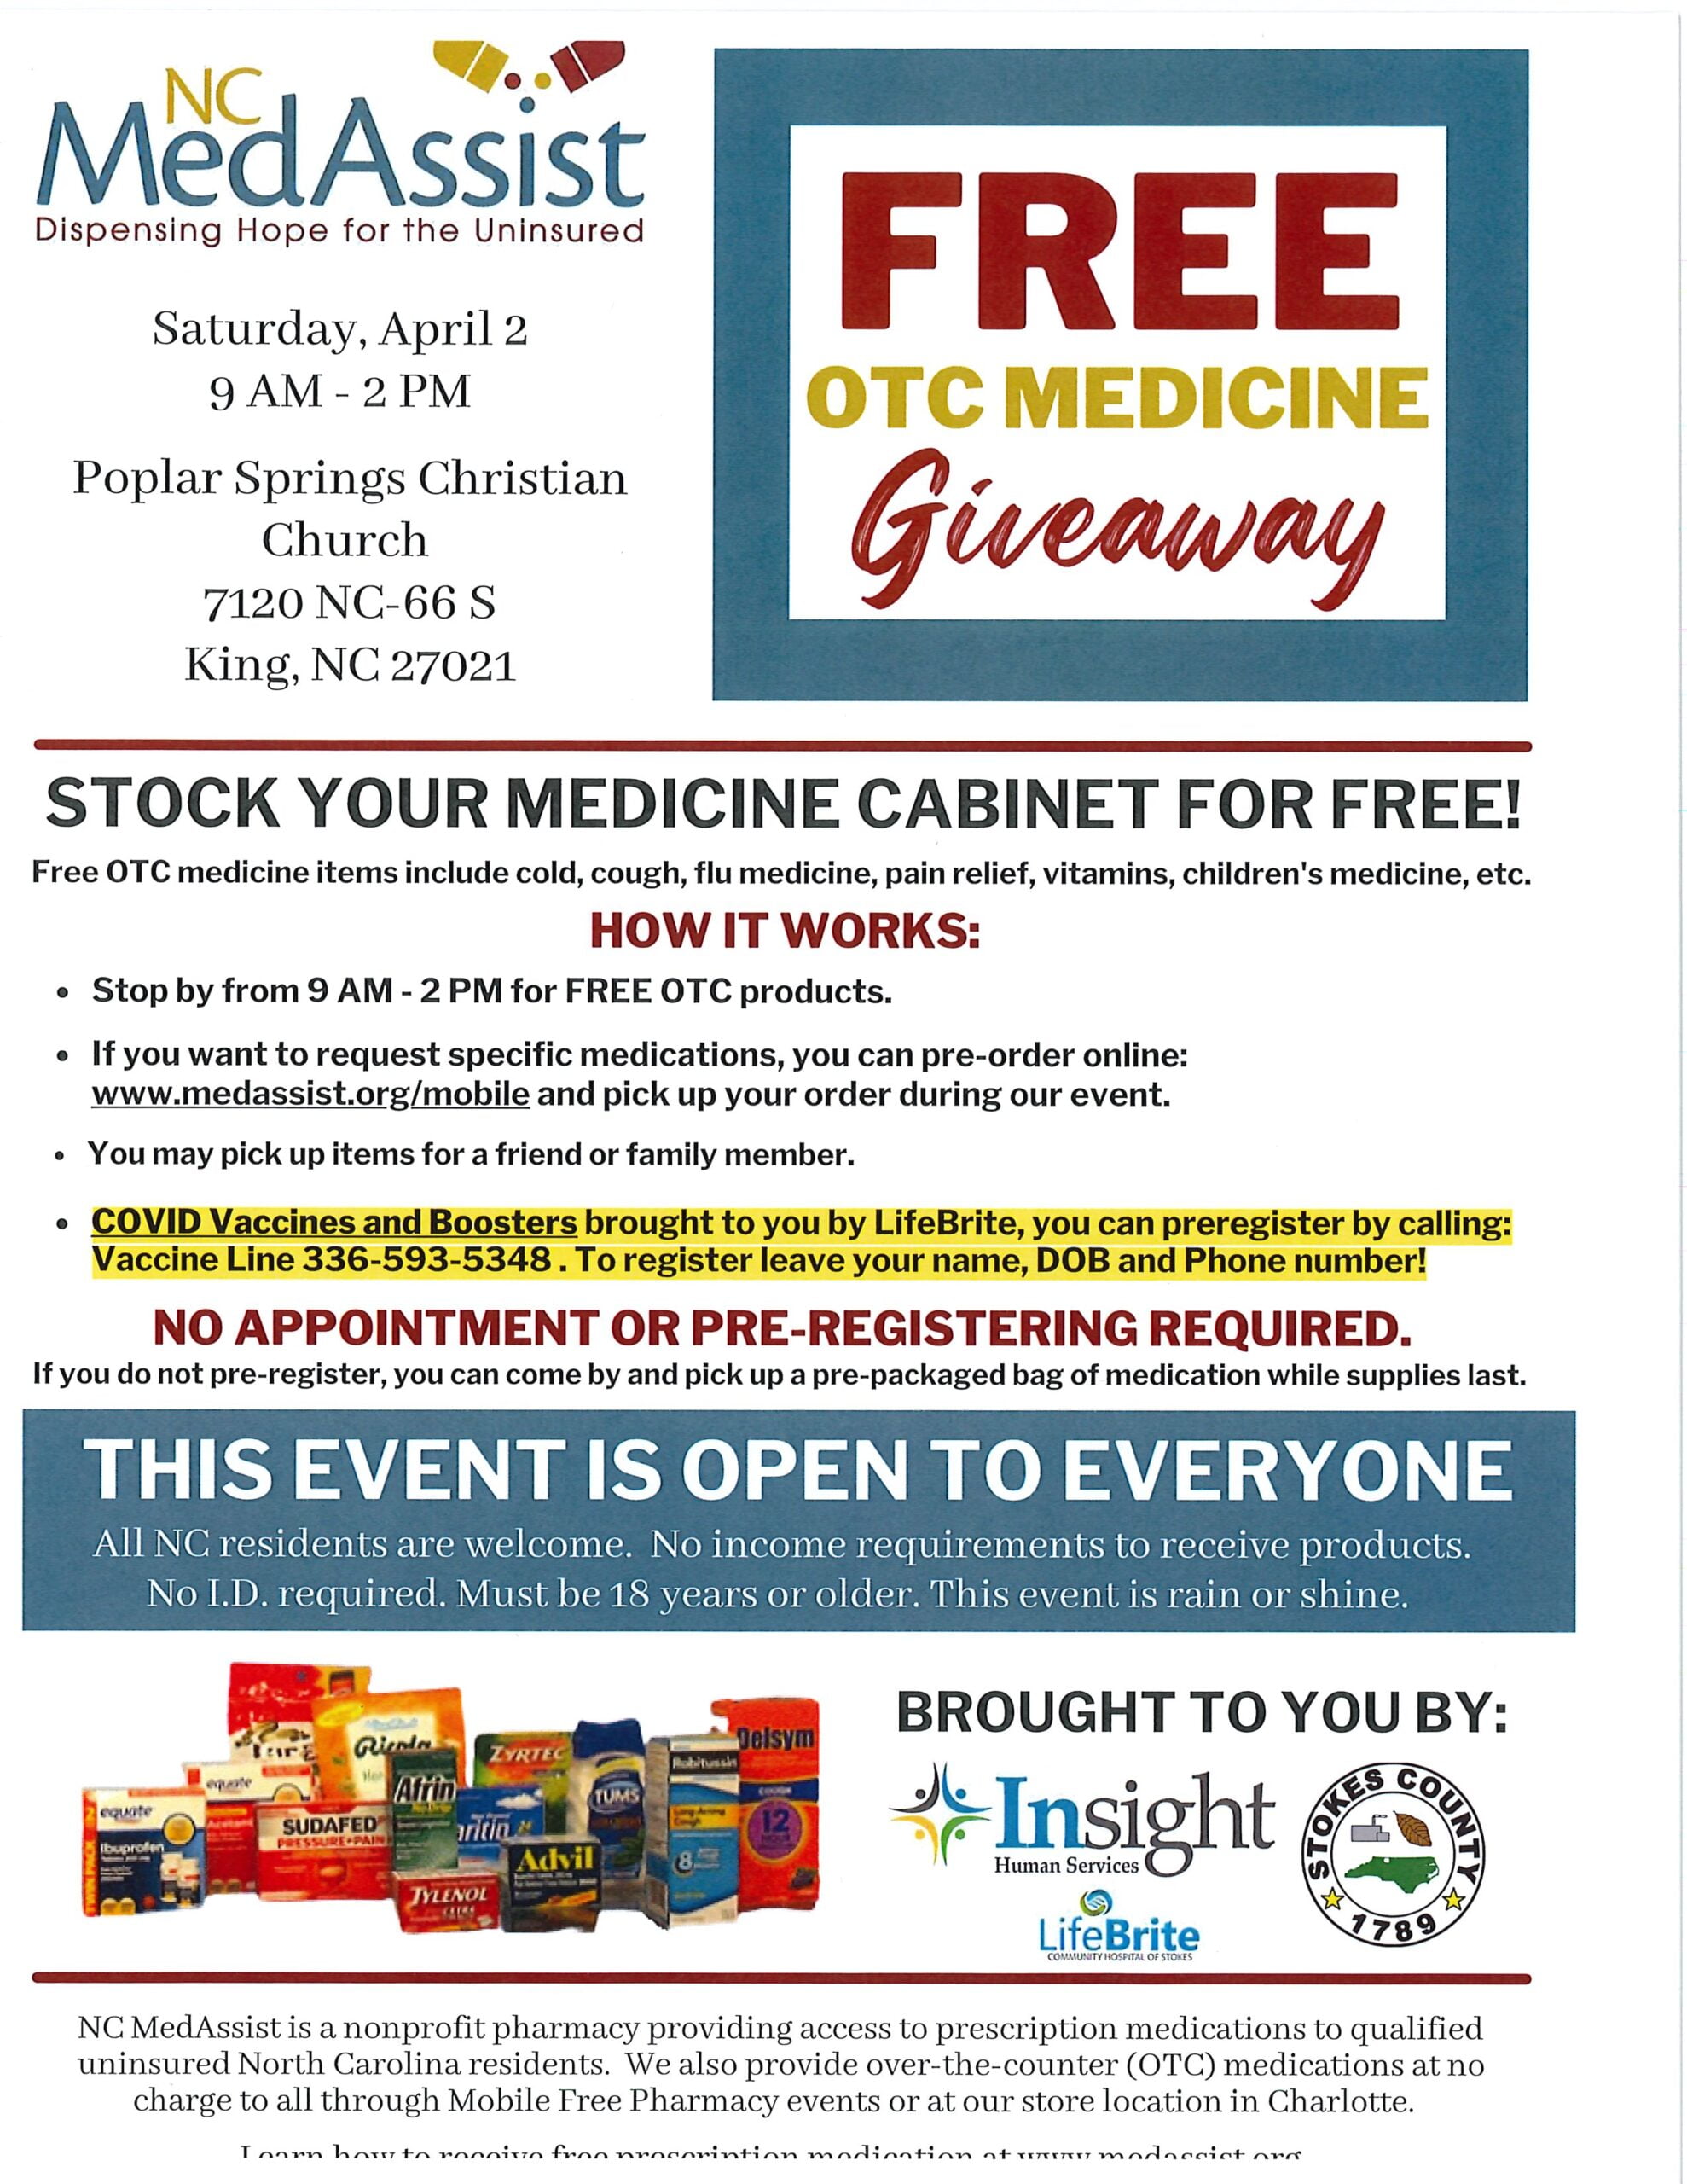 a flier advertising a COVID vaccine and booster clinic and OTC medication give away on April 2 at Poplar Springs Christian Church in King from 9-2